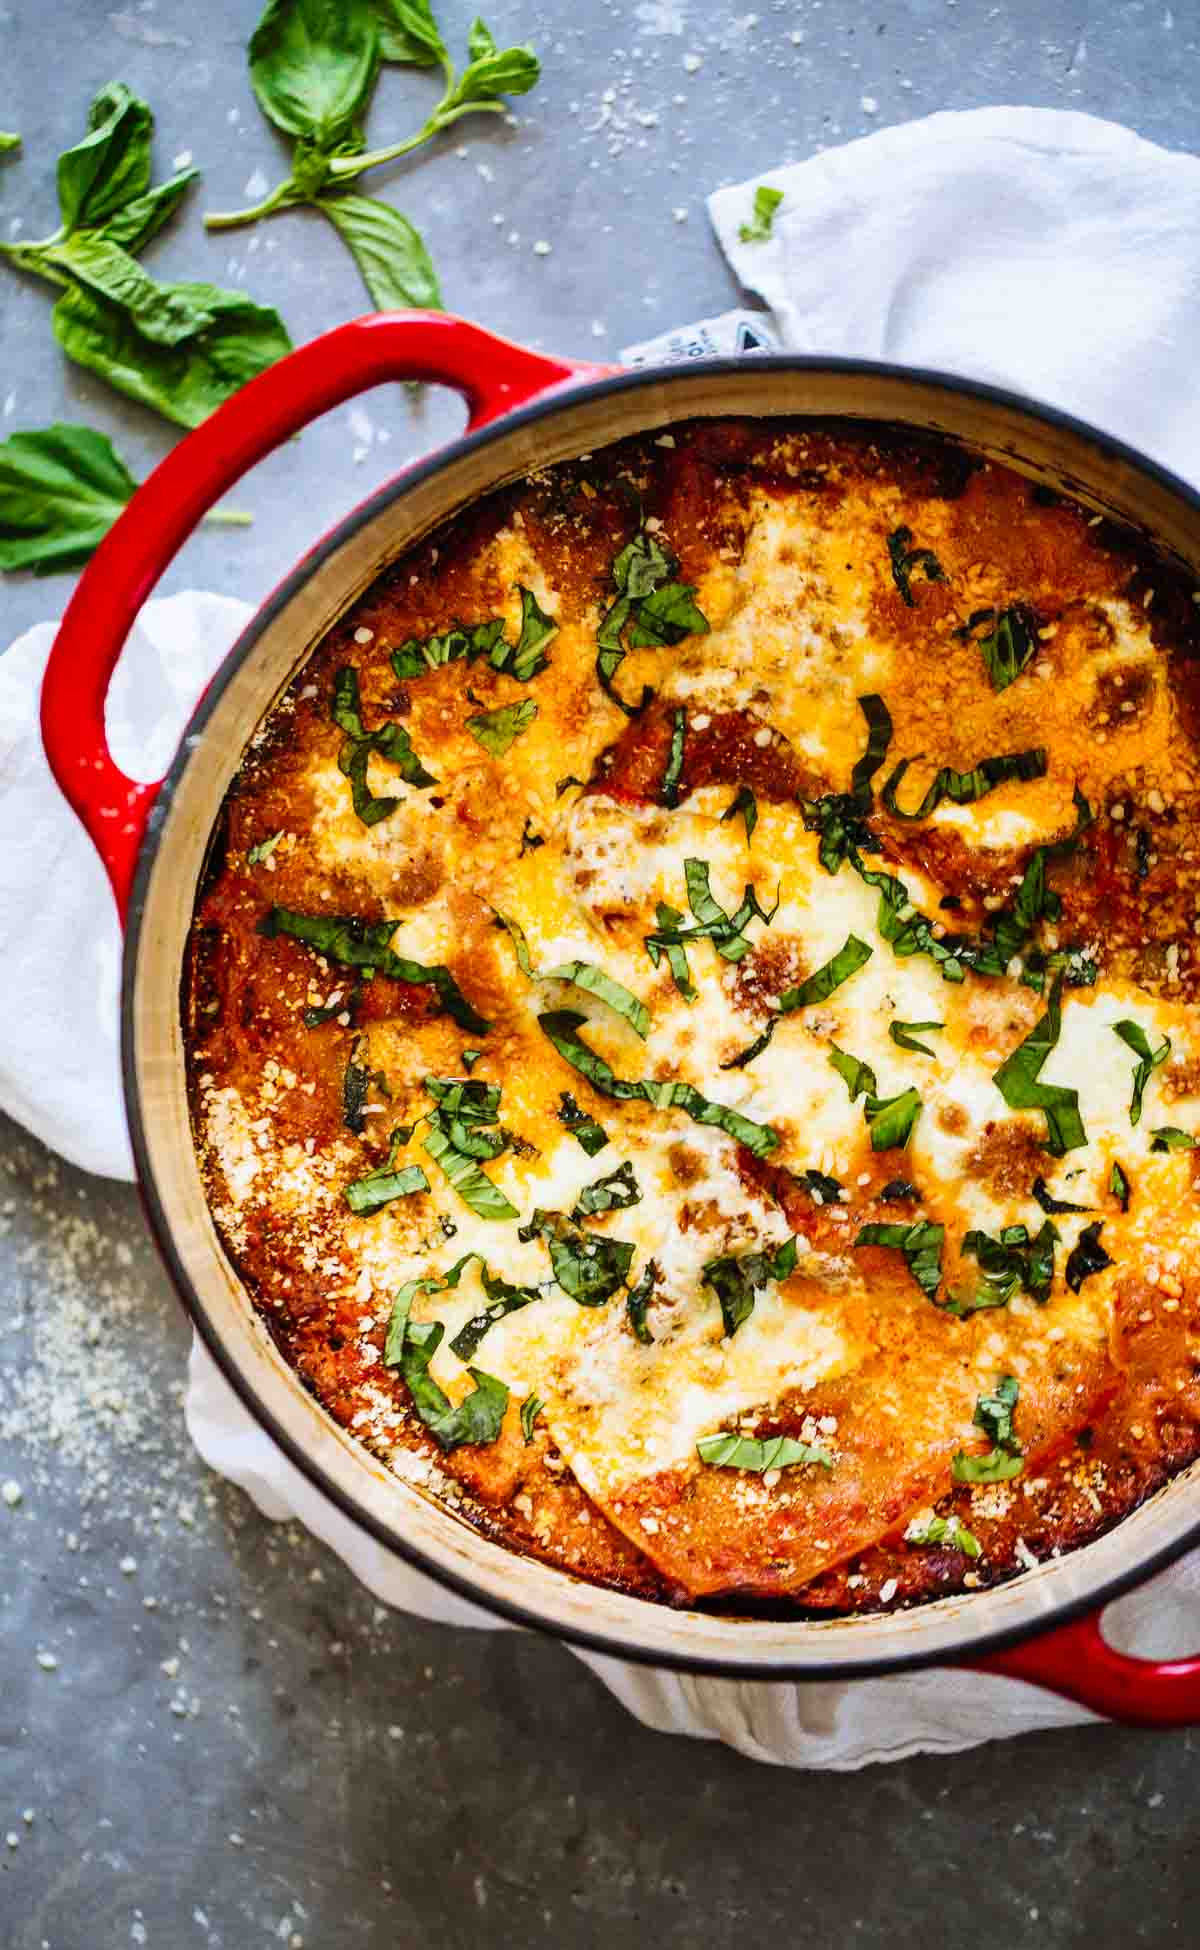 Oven Dinner Recipes Unique 10 Easy Recipes You Can Make In A Dutch Oven Gold Coast Girl